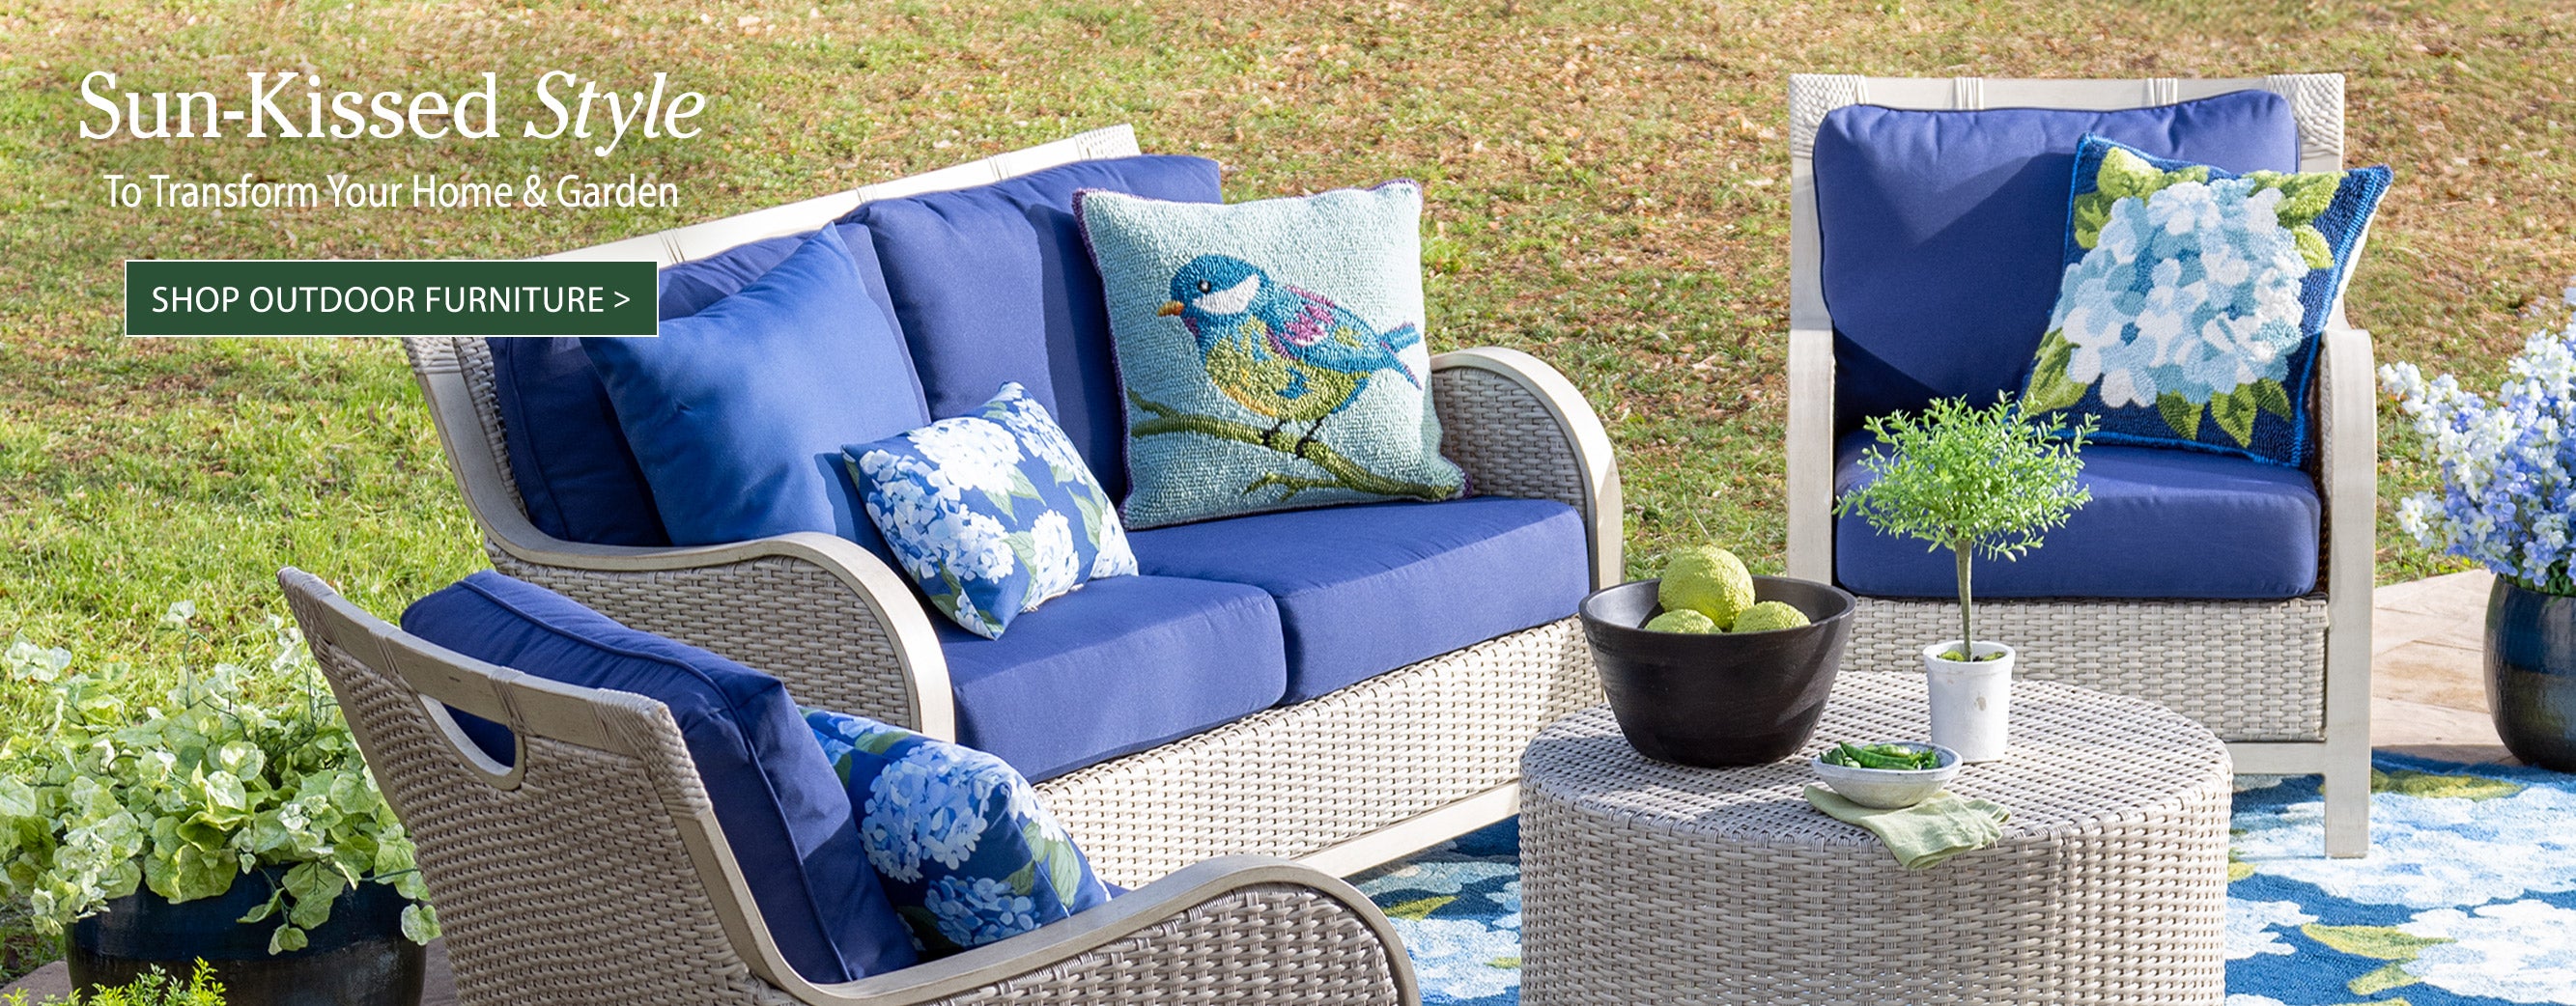 Image of Urbanna Premium Wicker Collection in Driftwood with Luxury Cushions. Sun-kissed Style To Transform Your Home & Garden. SHOP OUTDOOR FURNITURE